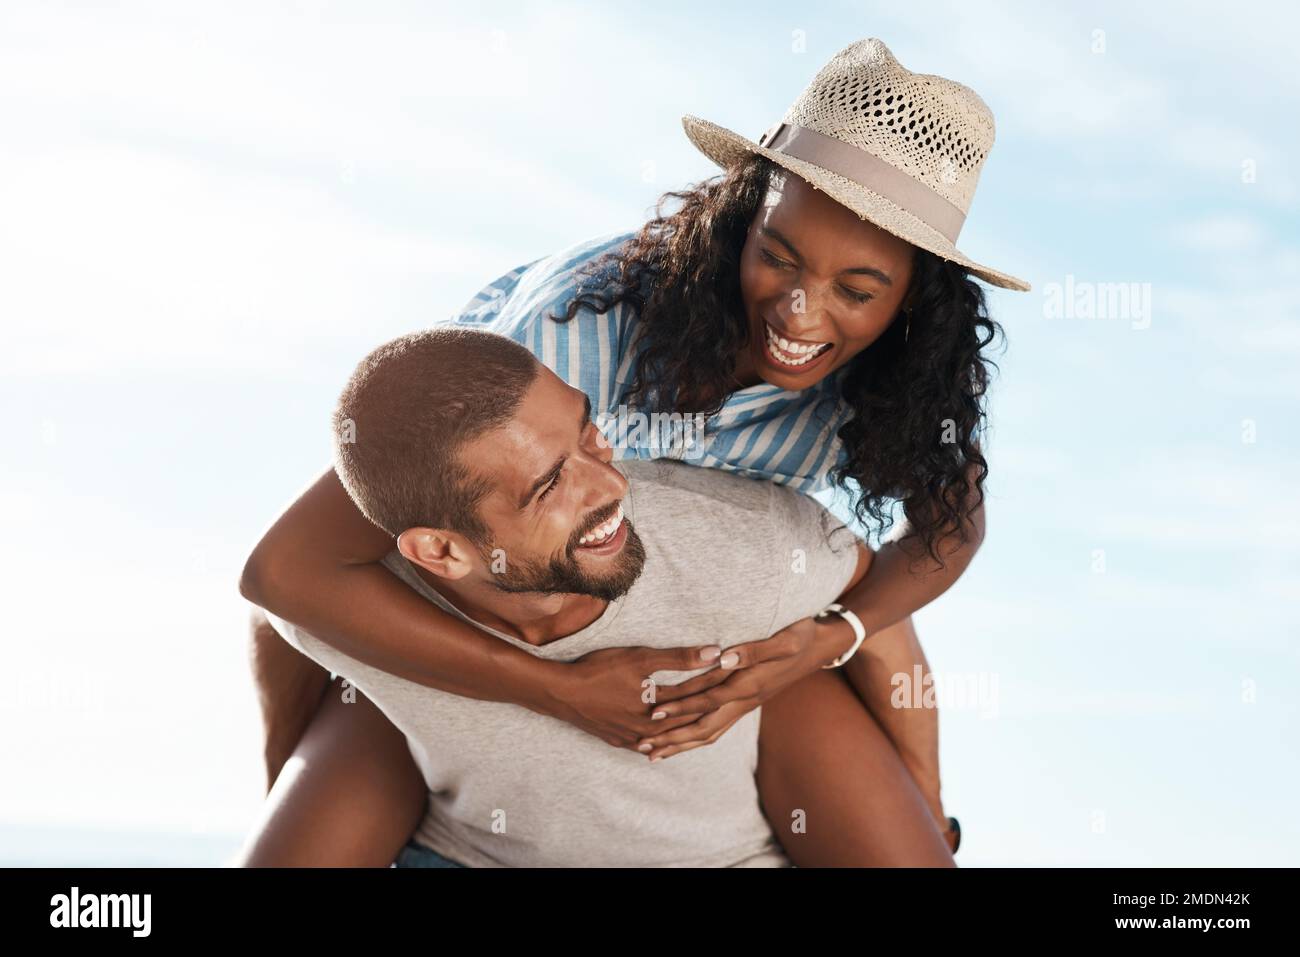 Your love lifts me higher. a young man piggybacking his girlfriend at the beach. Stock Photo